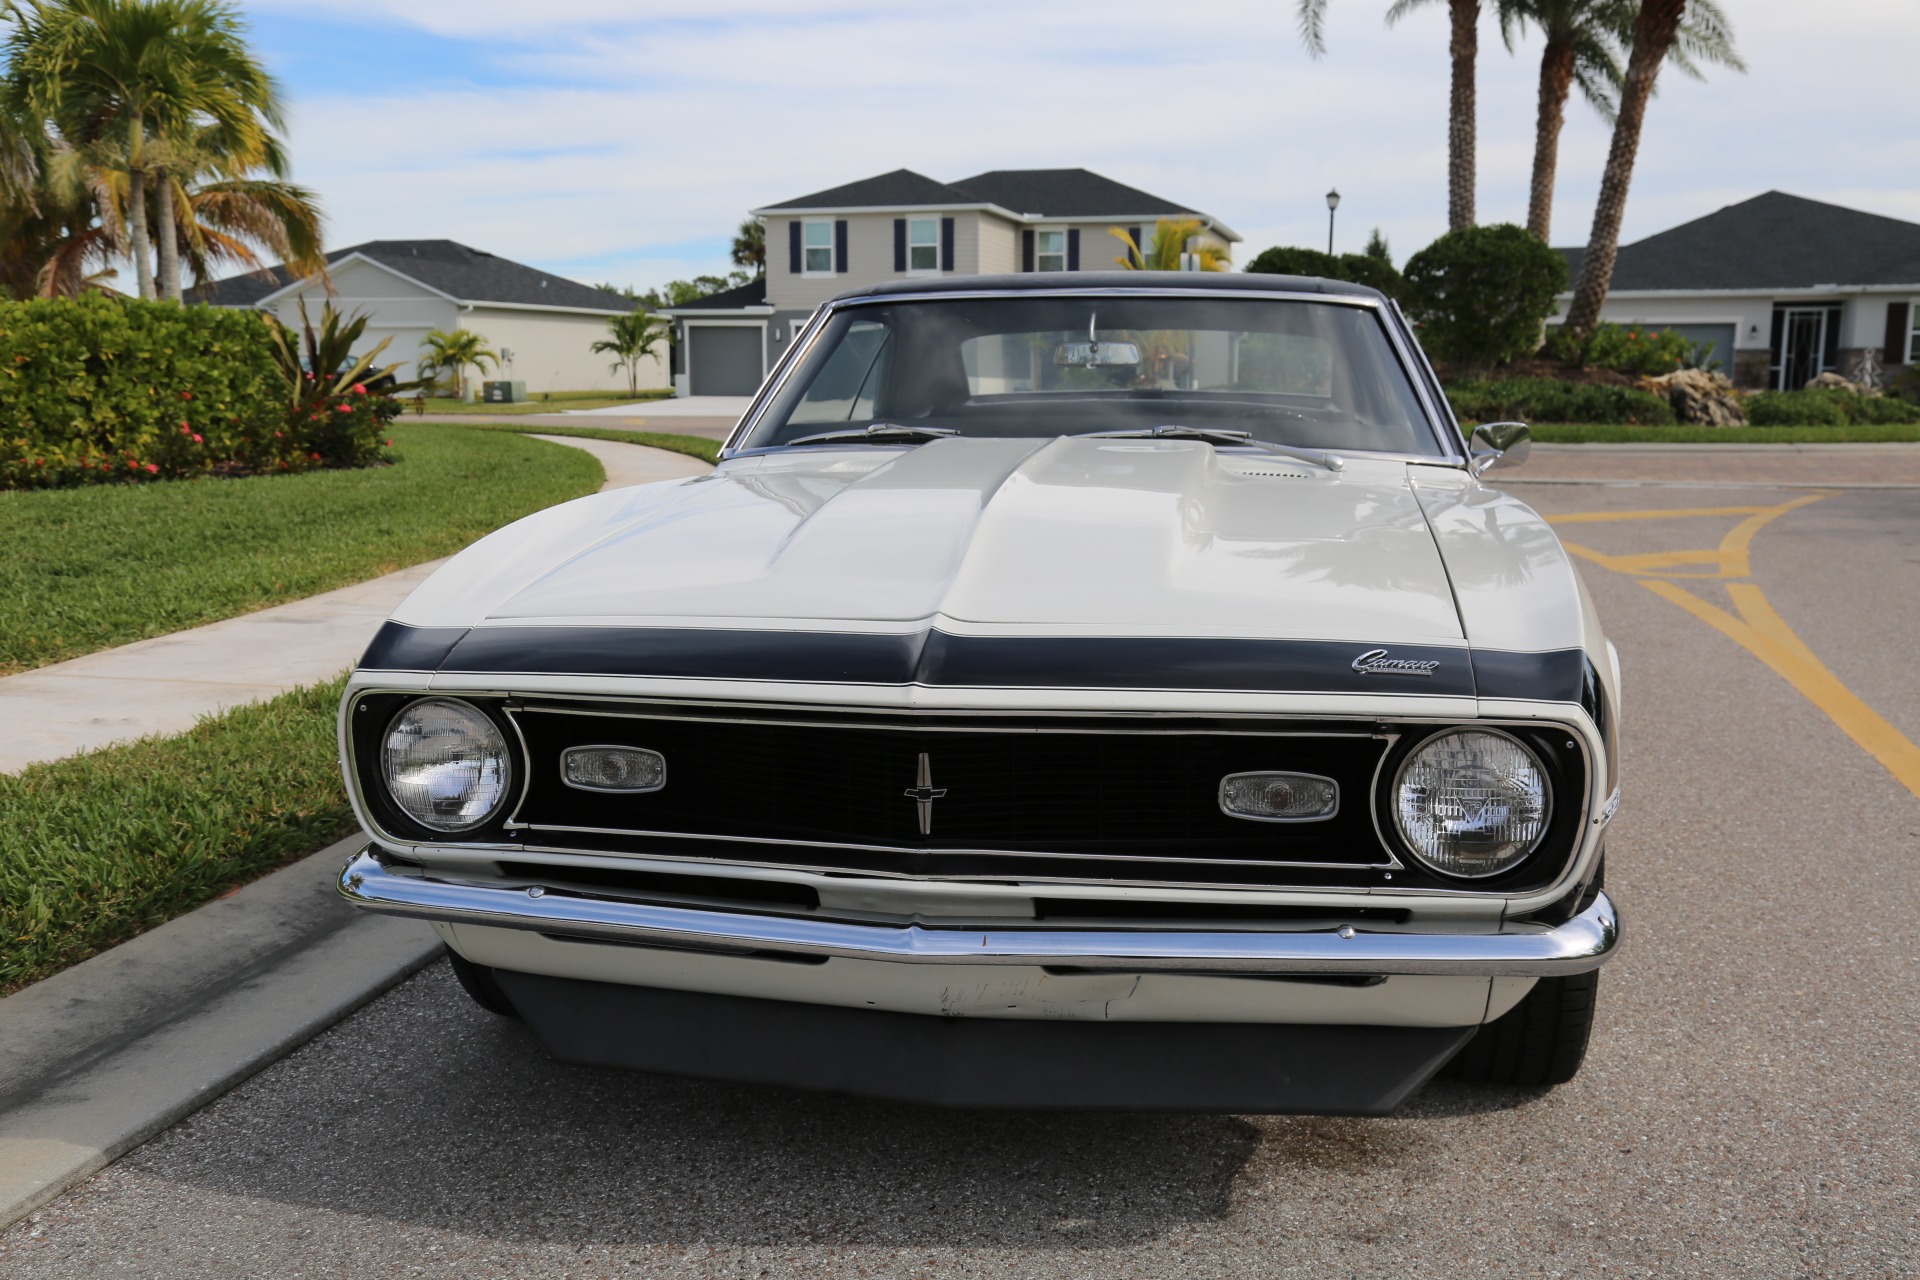 Used 1968 Chevy Camaro 327 V8 Auto # Match for sale Sold at Muscle Cars for Sale Inc. in Fort Myers FL 33912 4